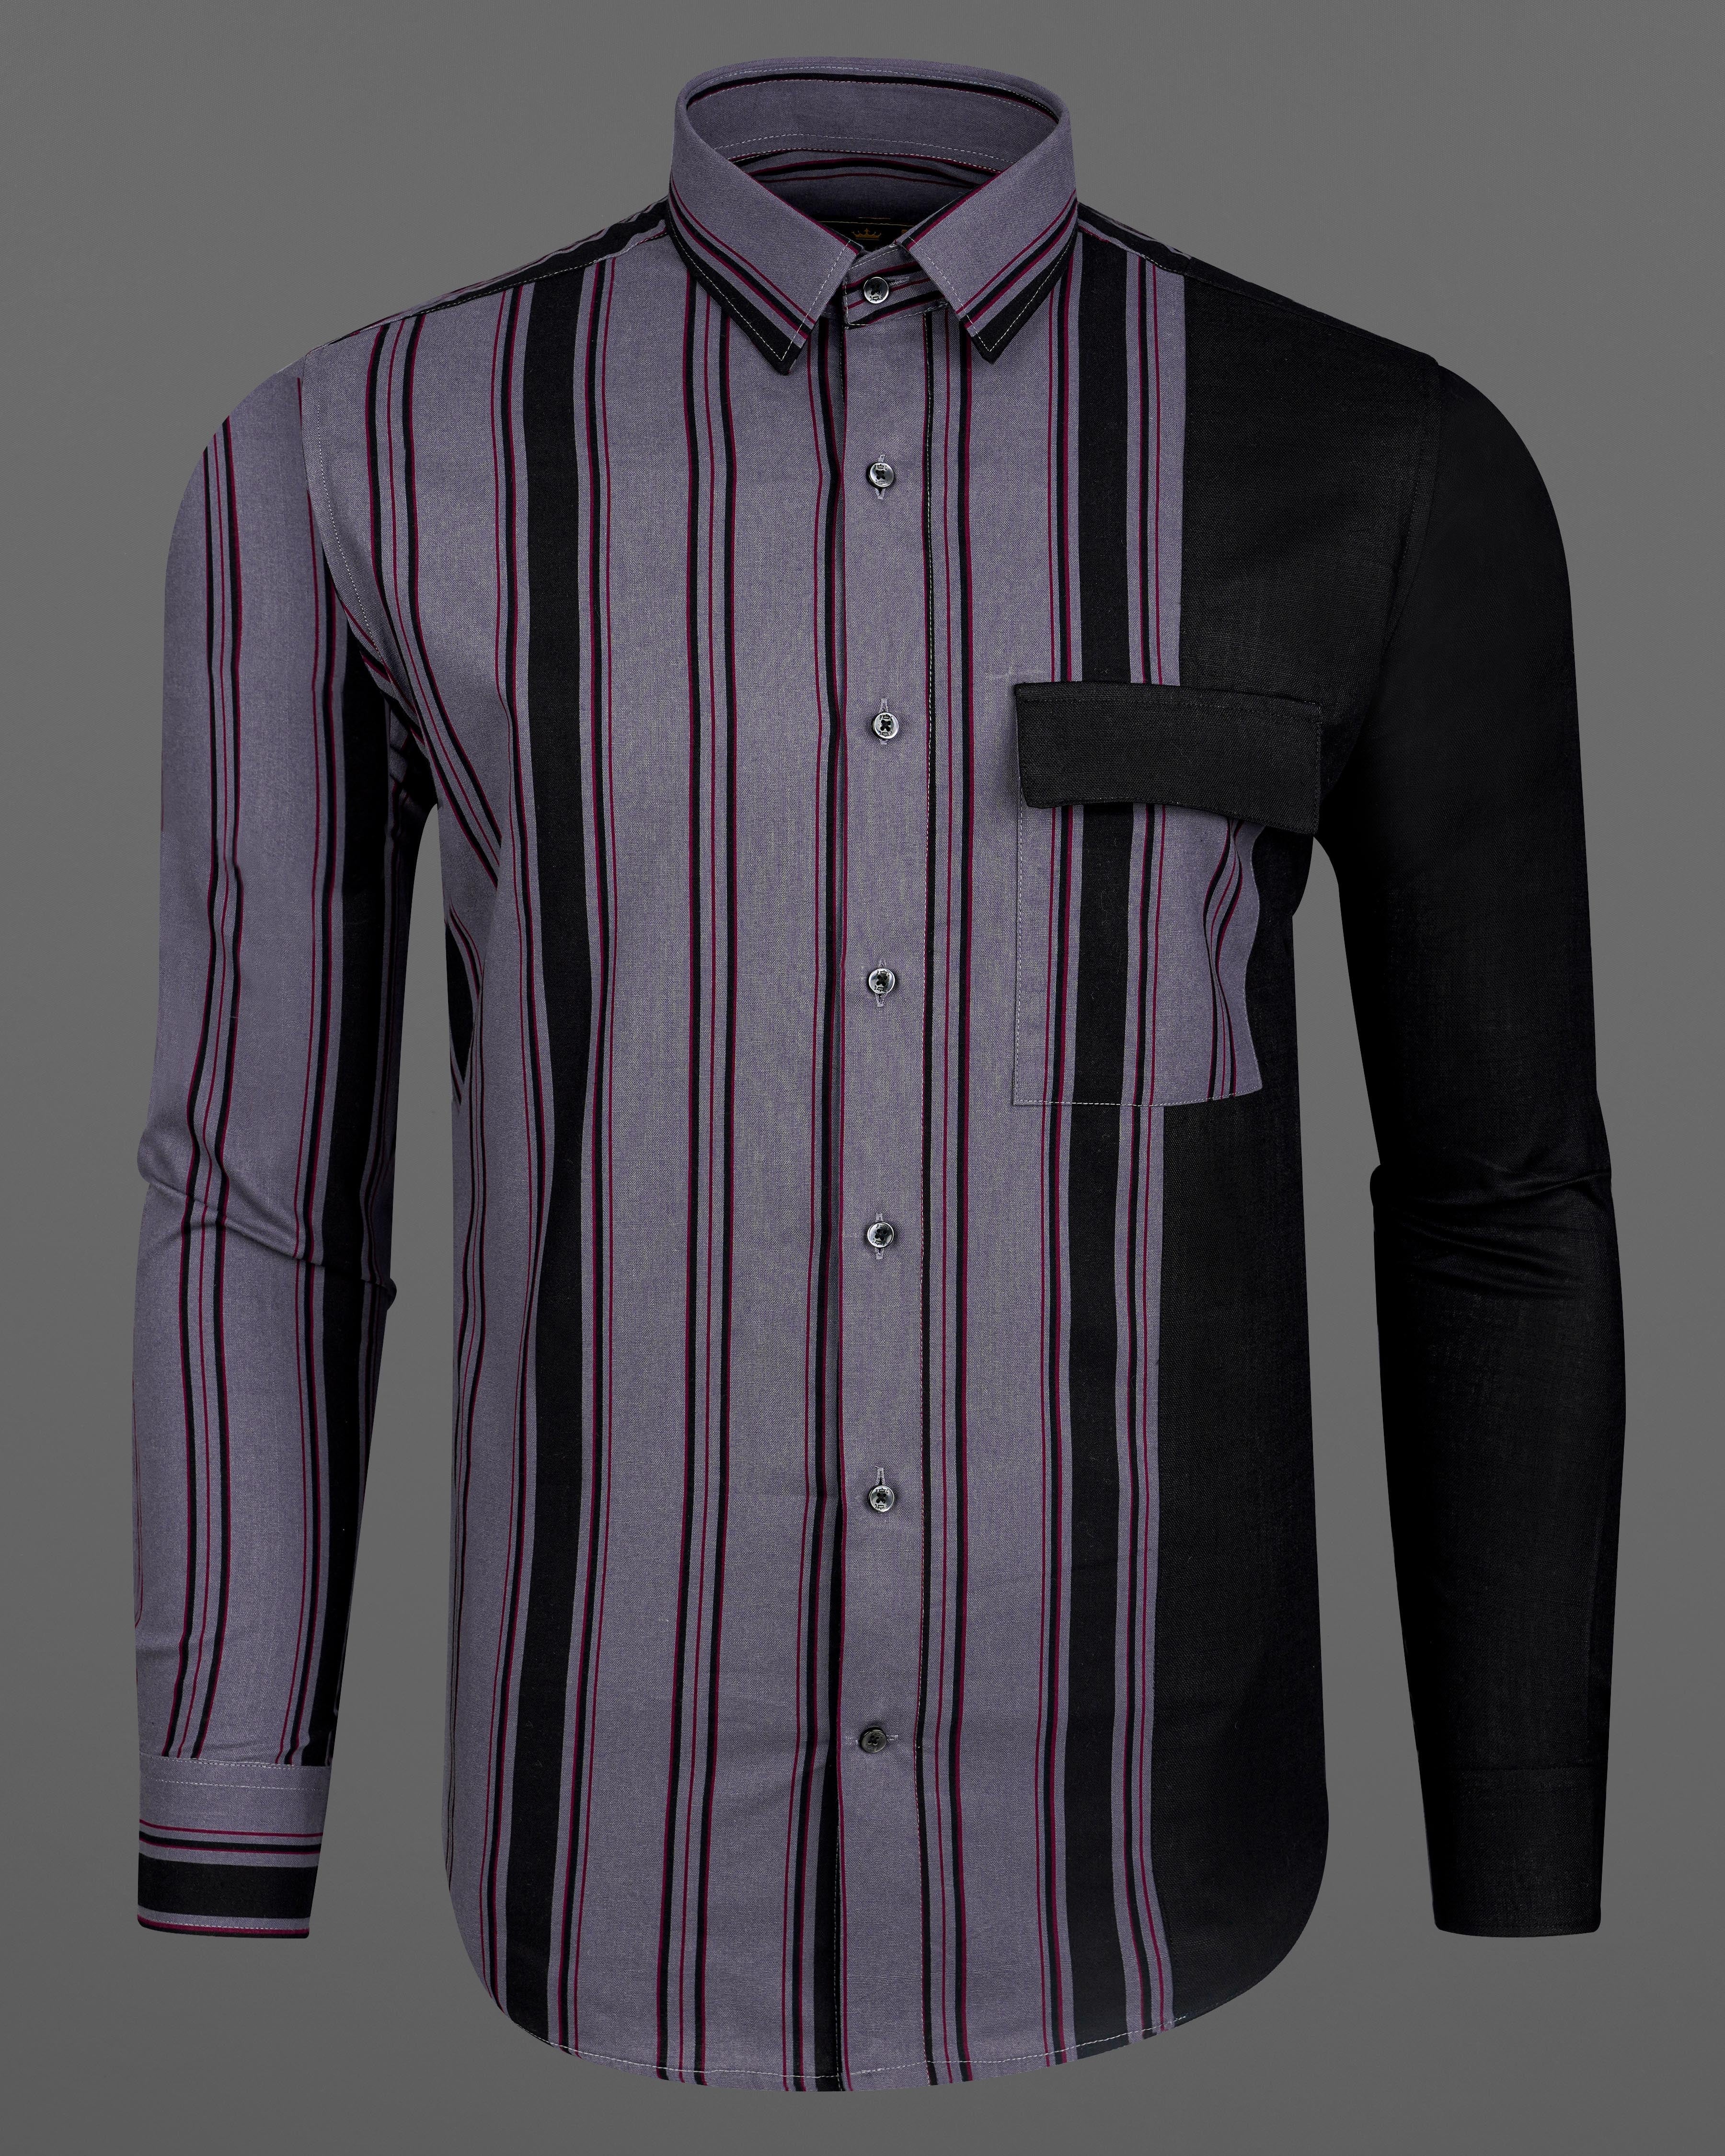 Mobster Gray and Black Striped Royal Oxford Designer Shirt 8331-BLK-P111 -38,8331-BLK-P111 -H-38,8331-BLK-P111 -39,8331-BLK-P111 -H-39,8331-BLK-P111 -40,8331-BLK-P111 -H-40,8331-BLK-P111 -42,8331-BLK-P111 -H-42,8331-BLK-P111 -44,8331-BLK-P111 -H-44,8331-BLK-P111 -46,8331-BLK-P111 -H-46,8331-BLK-P111 -48,8331-BLK-P111 -H-48,8331-BLK-P111 -50,8331-BLK-P111 -H-50,8331-BLK-P111 -52,8331-BLK-P111 -H-52